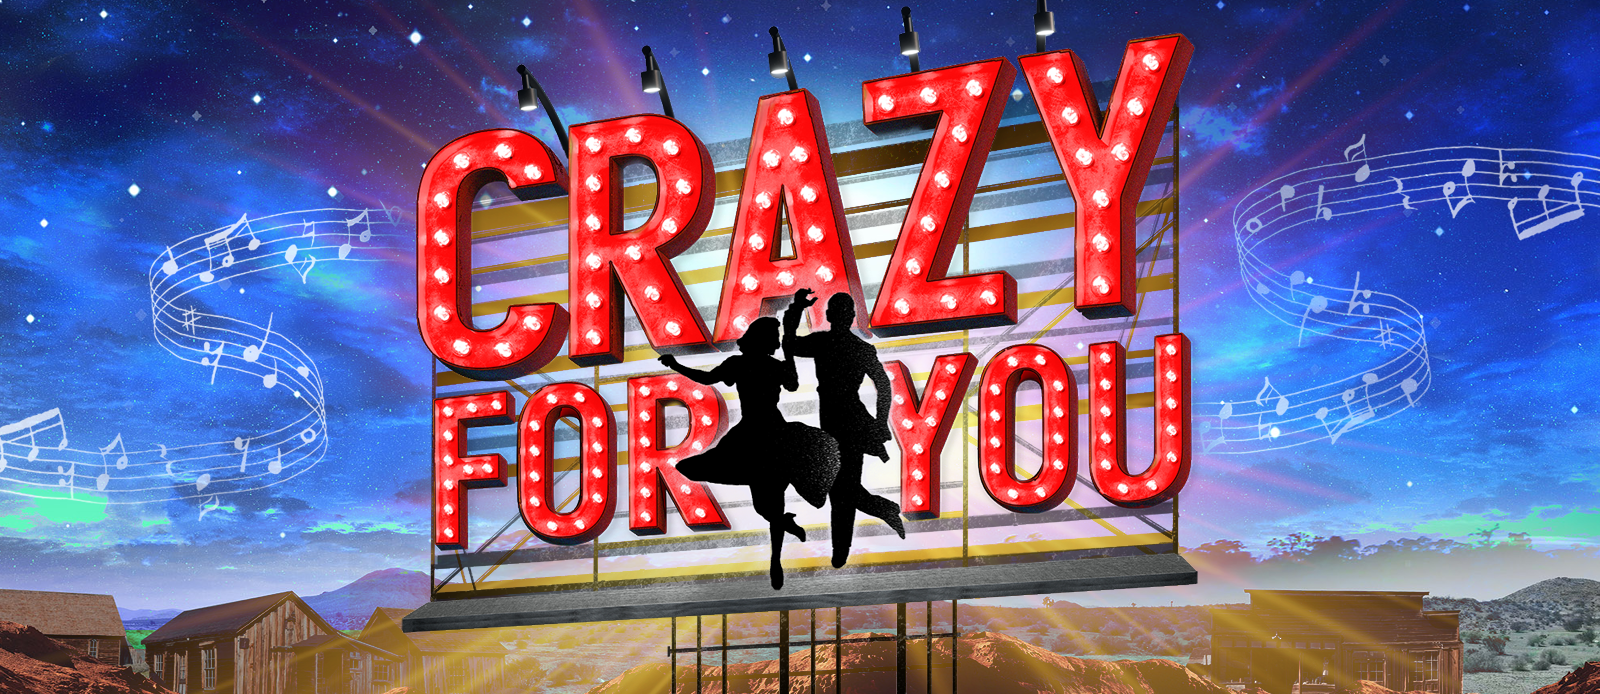 Crazy for You with Asolo Repertory Theatre - Artelize